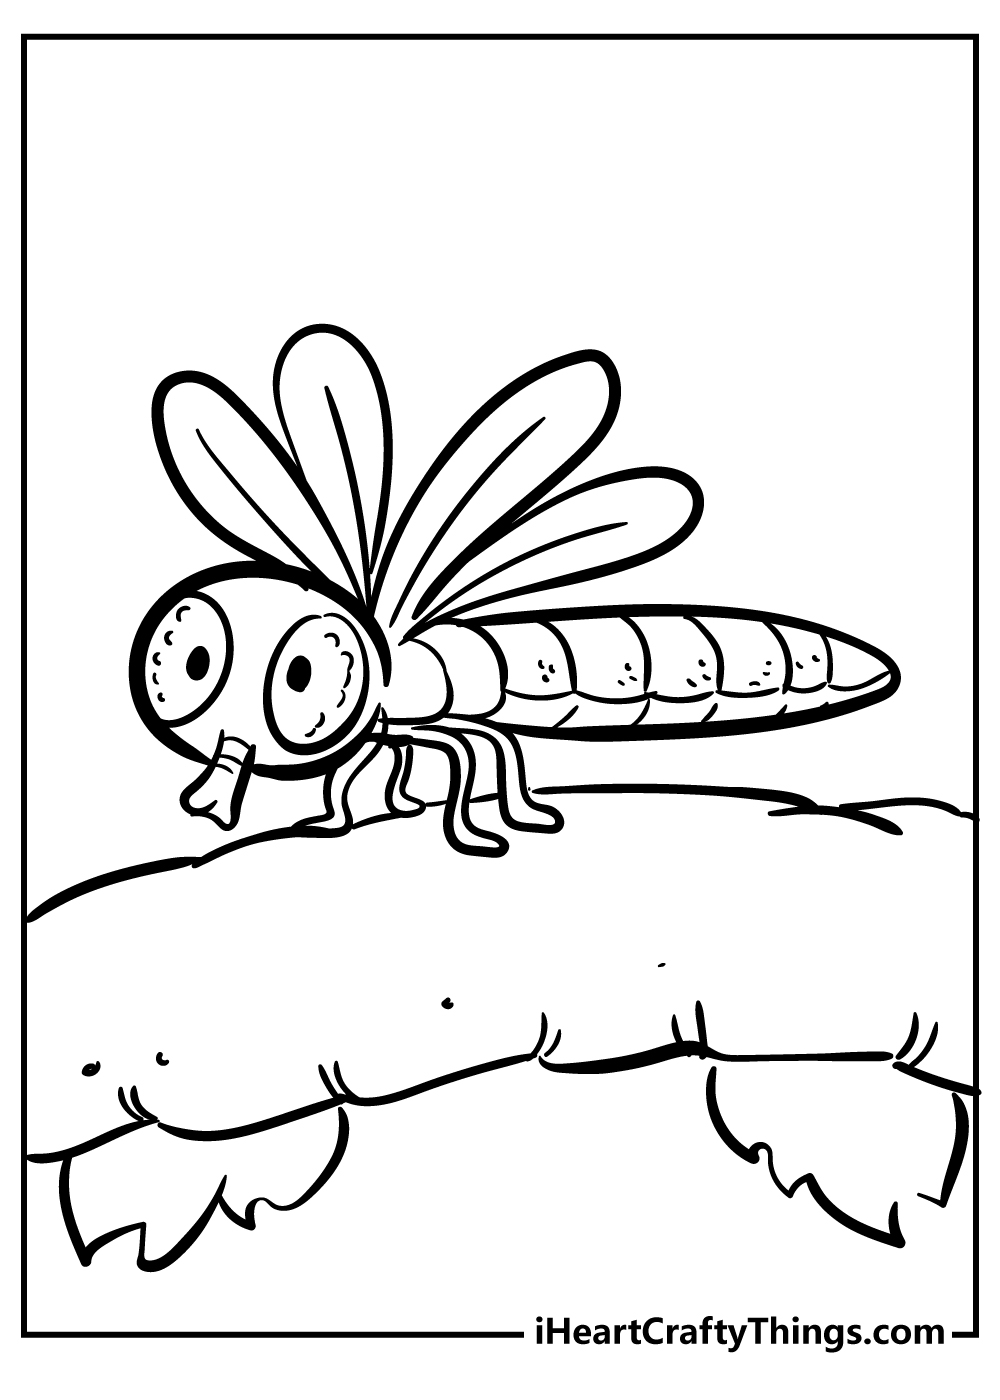 Insect Coloring Original Sheet for children free download